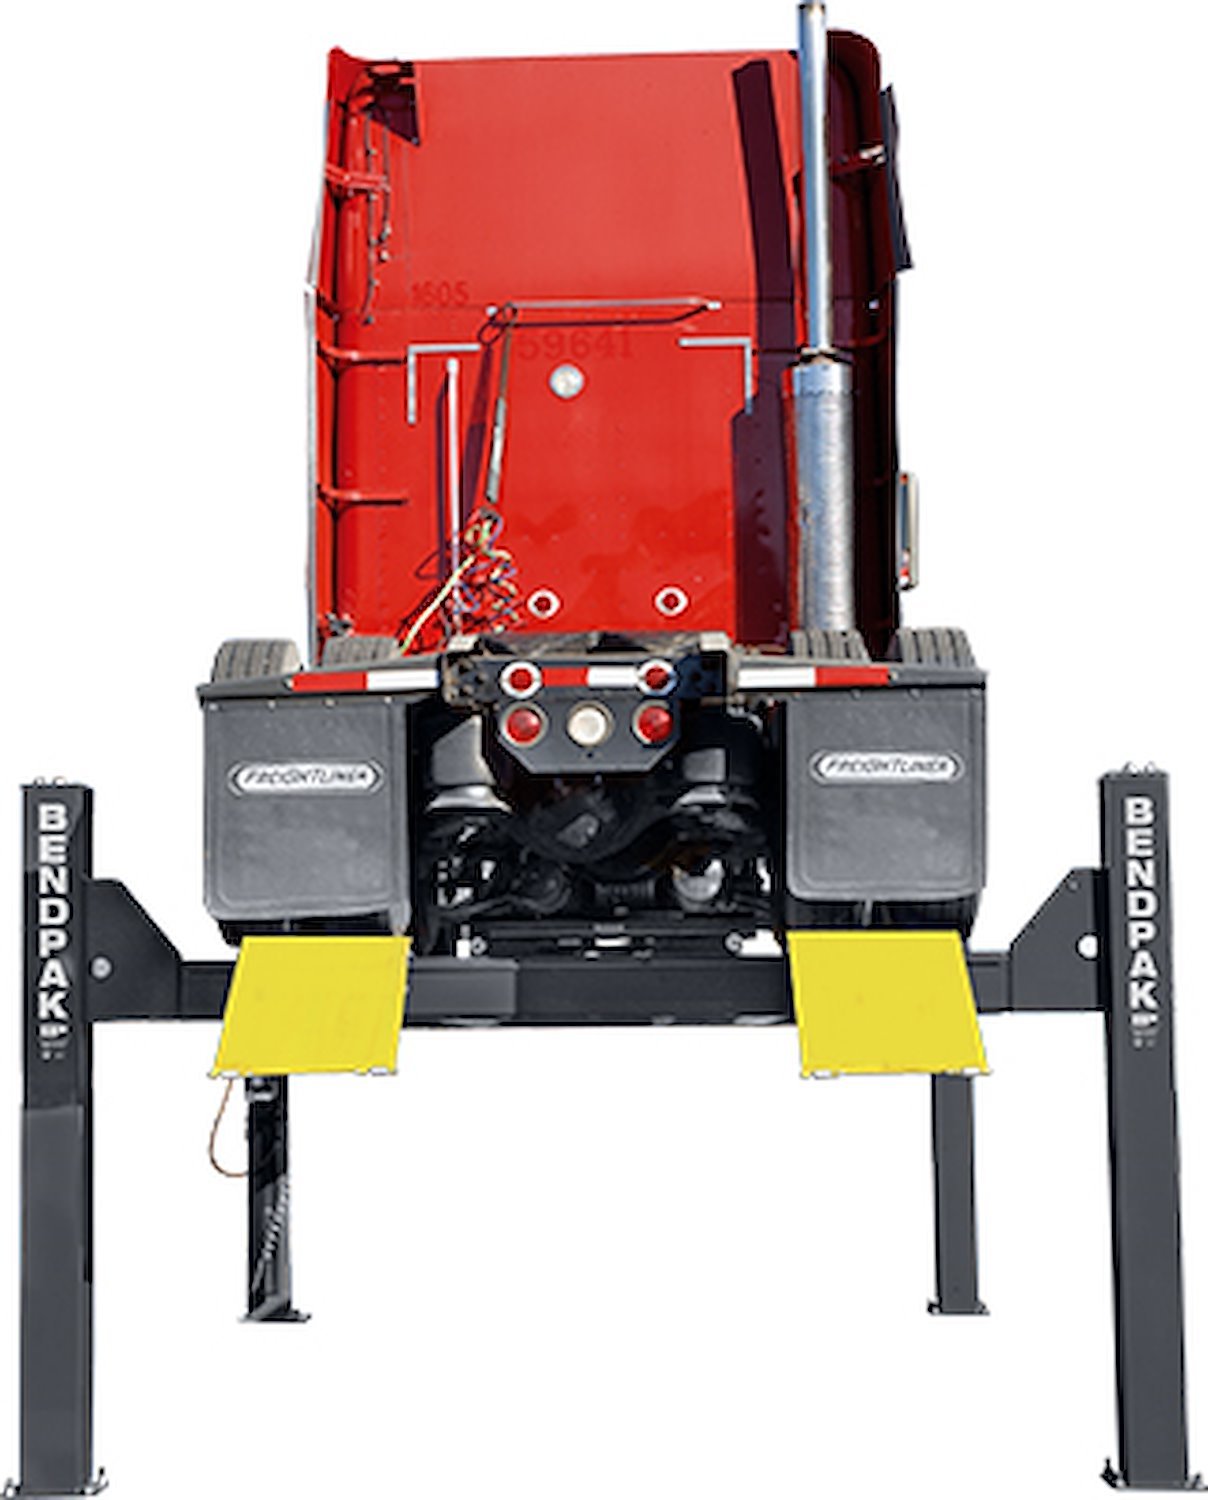 HDS-27X Extended-Length Four-Post Lift, 27,000-lb. Capacity